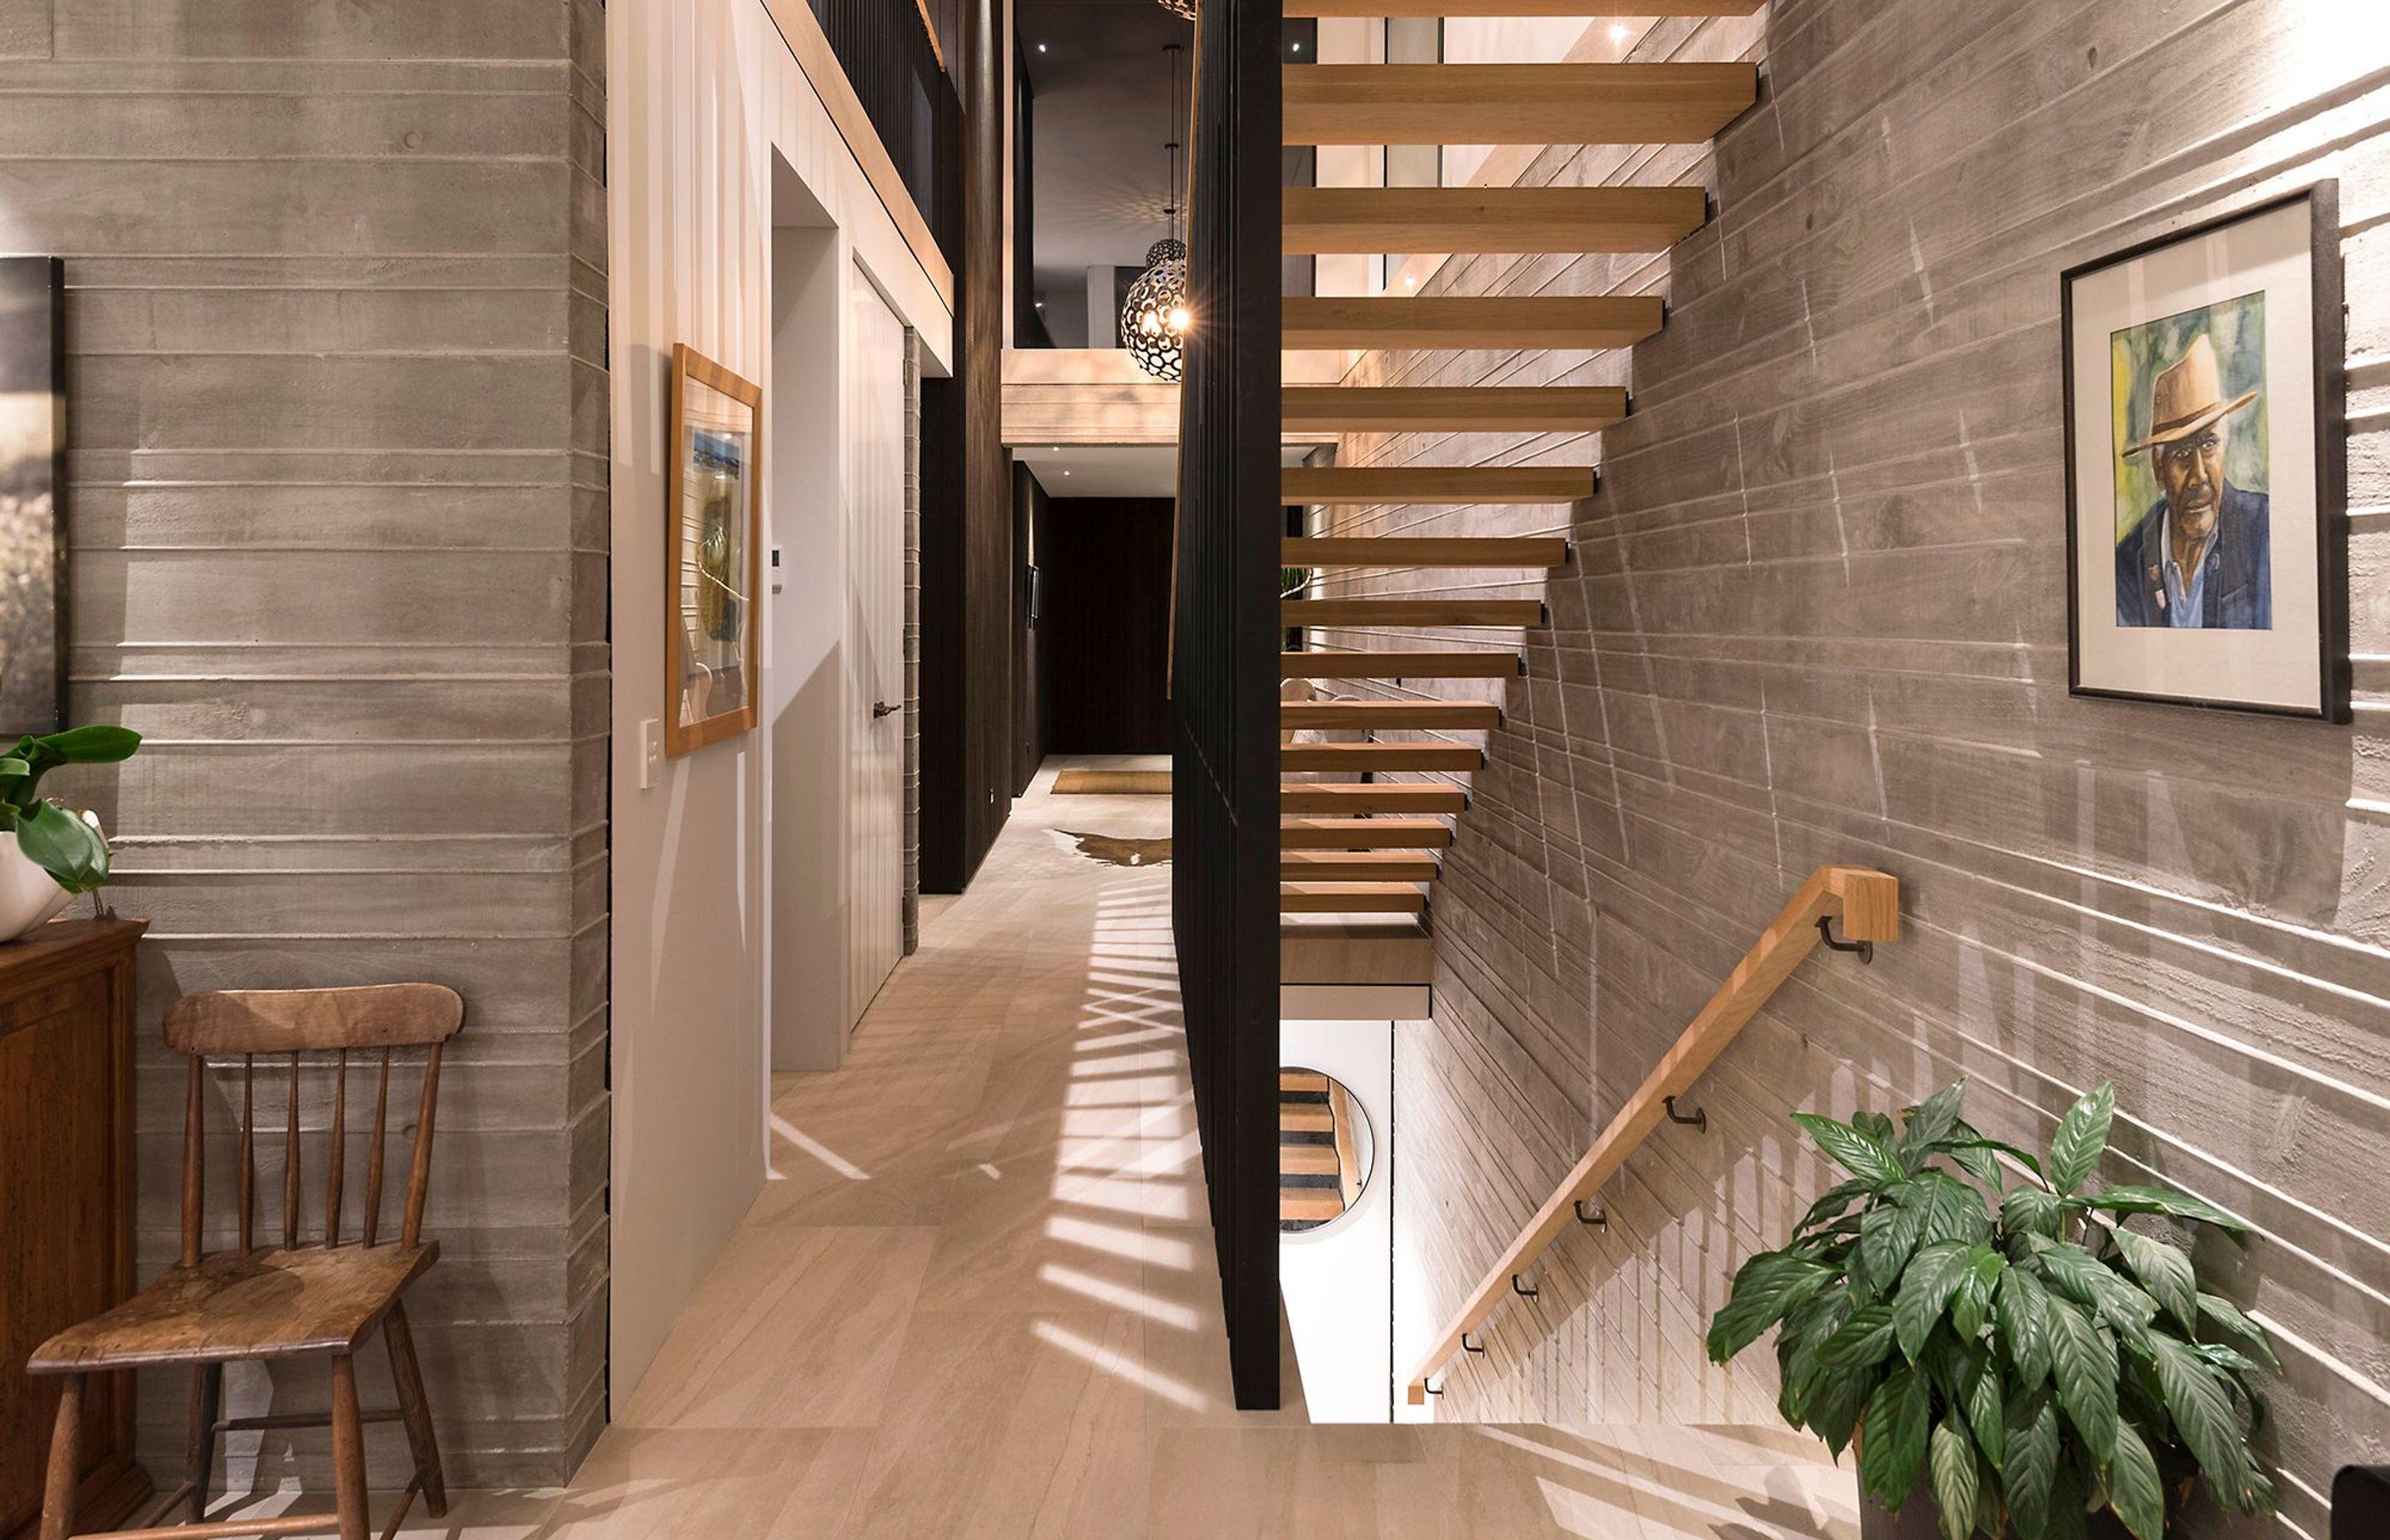 The timber and metal stairwell connects three floors and is backed by a striking wall constructed in shuttered insitu concrete.